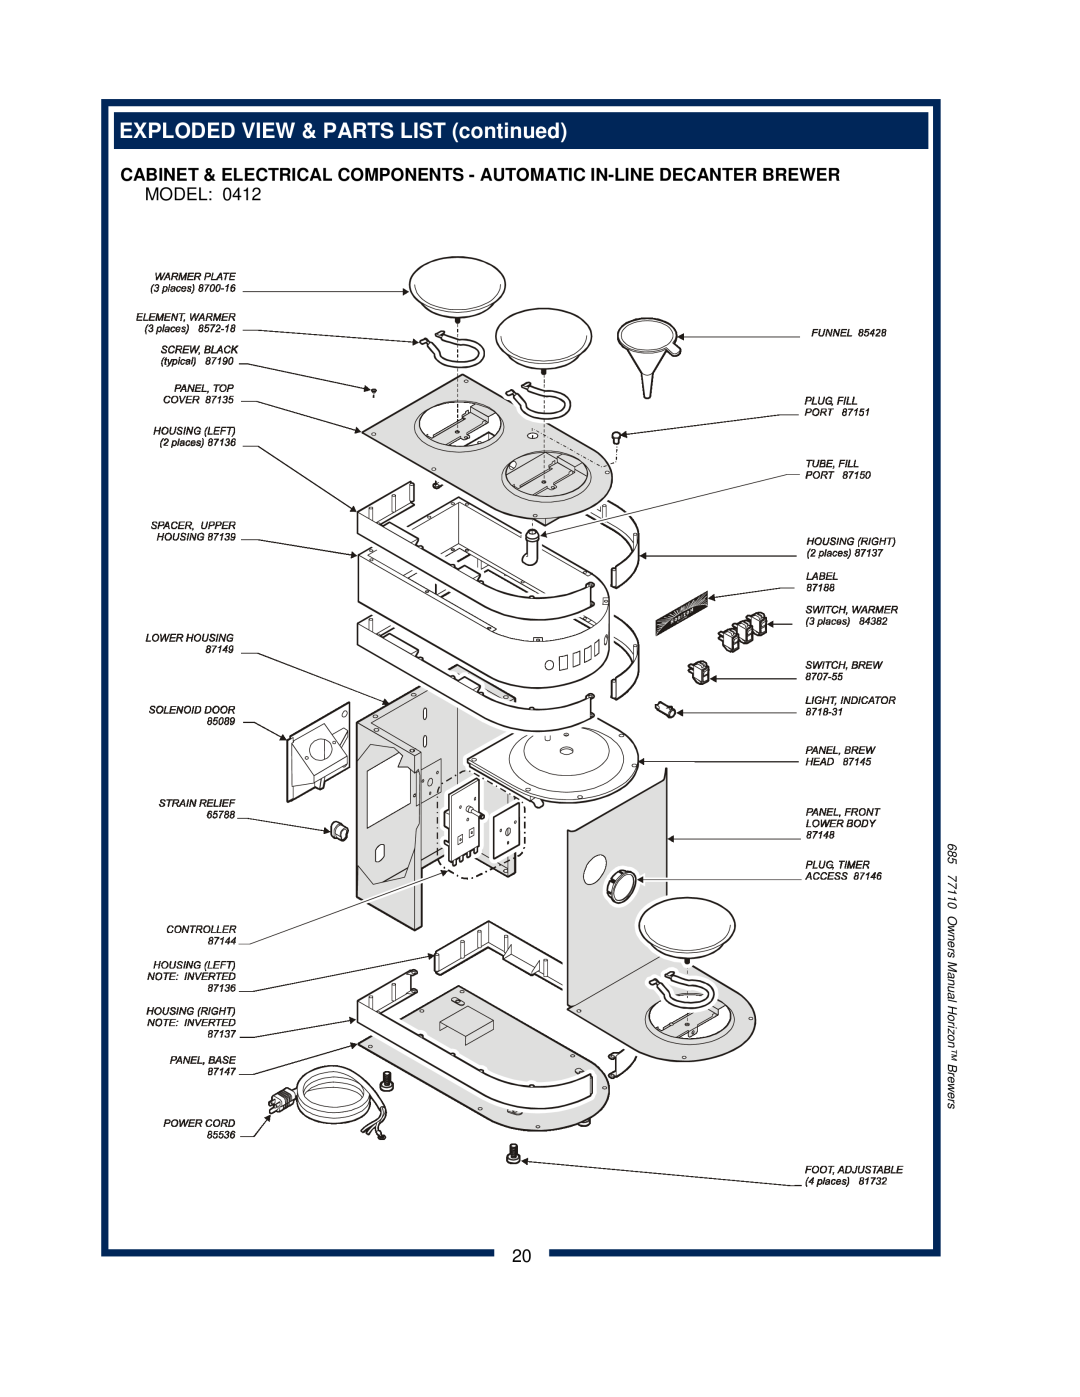 Bloomfield 0471 EXPLODED VIEW & PARTS LIST continued, Cabinet & Electrical Components - Automatic In-Line Decanter Brewer 